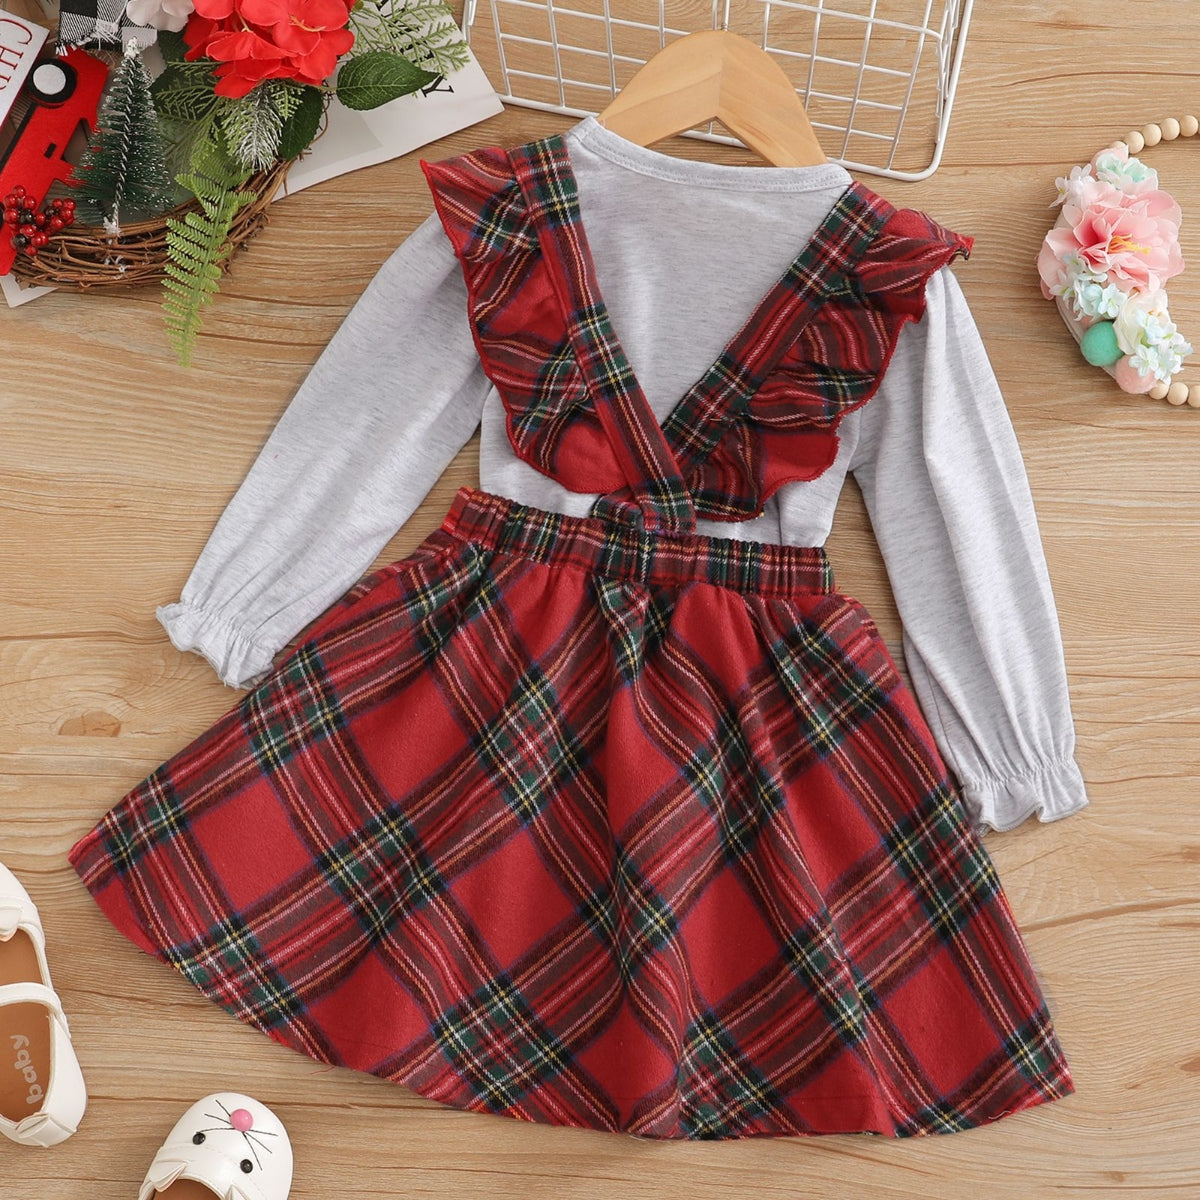 Children’s Girls Graphic Top and Plaid Overall Skirt Set